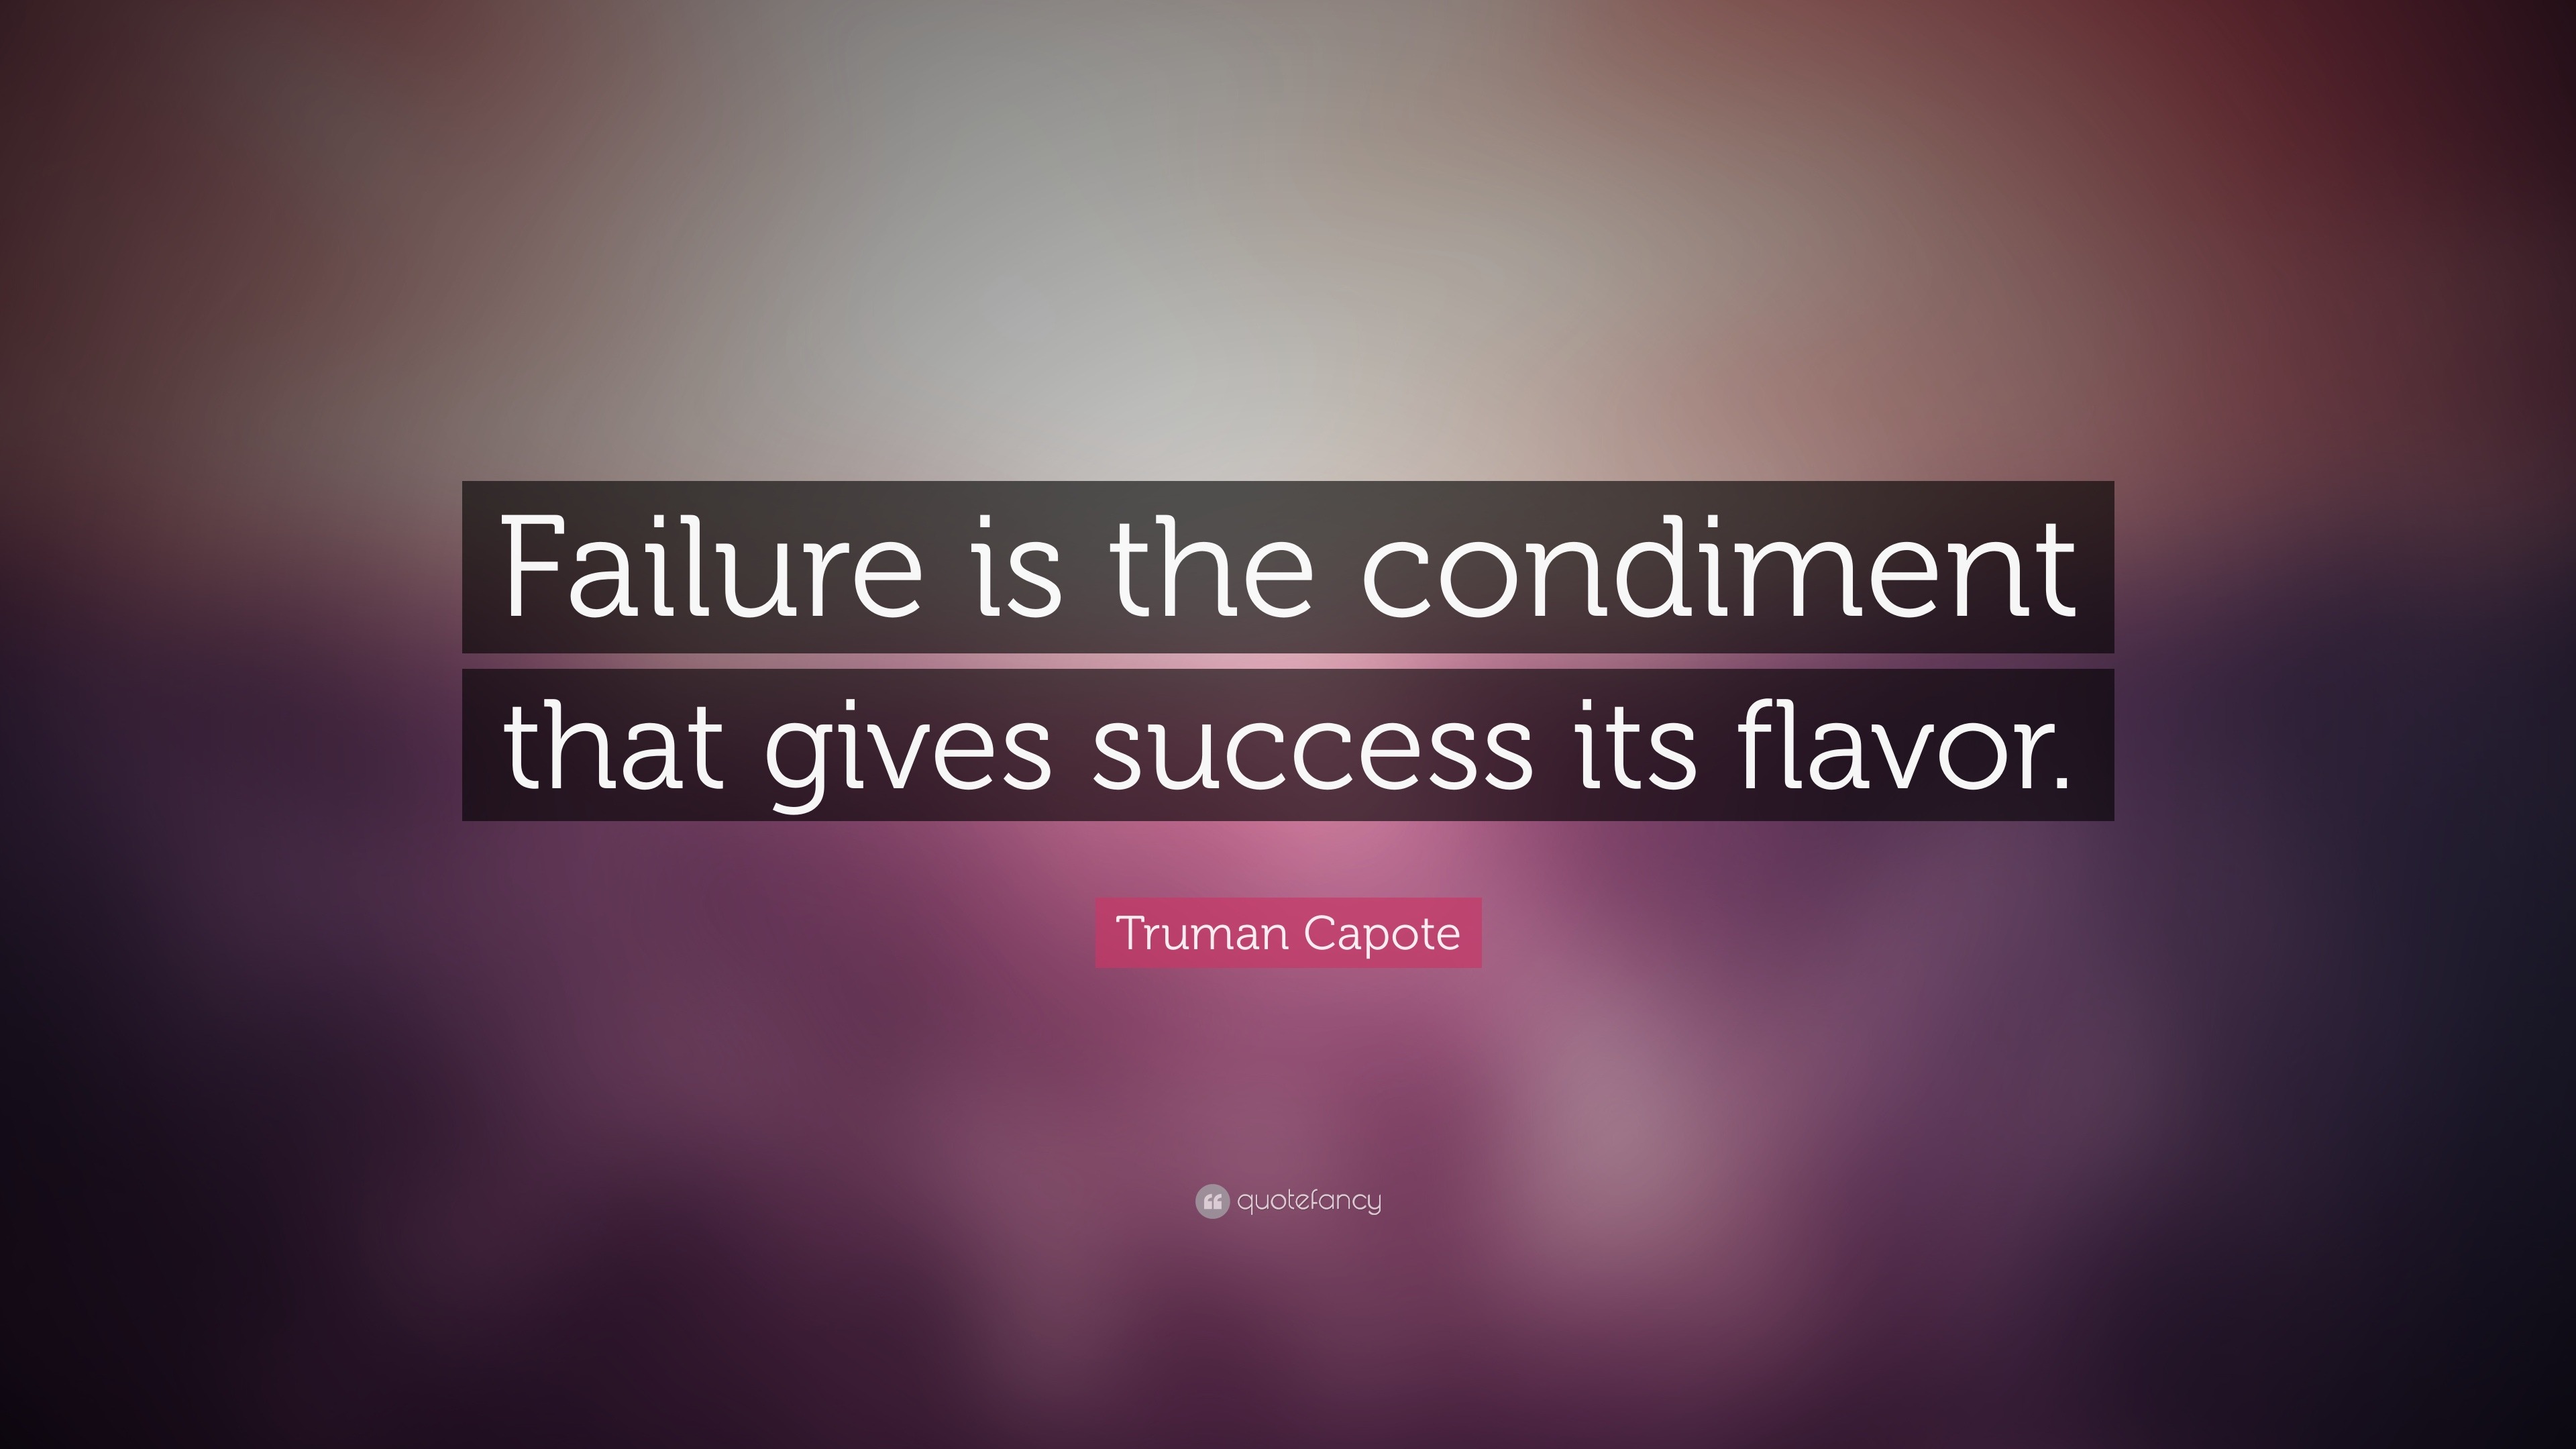 Truman Capote Quote: “Failure is the condiment that gives success ...